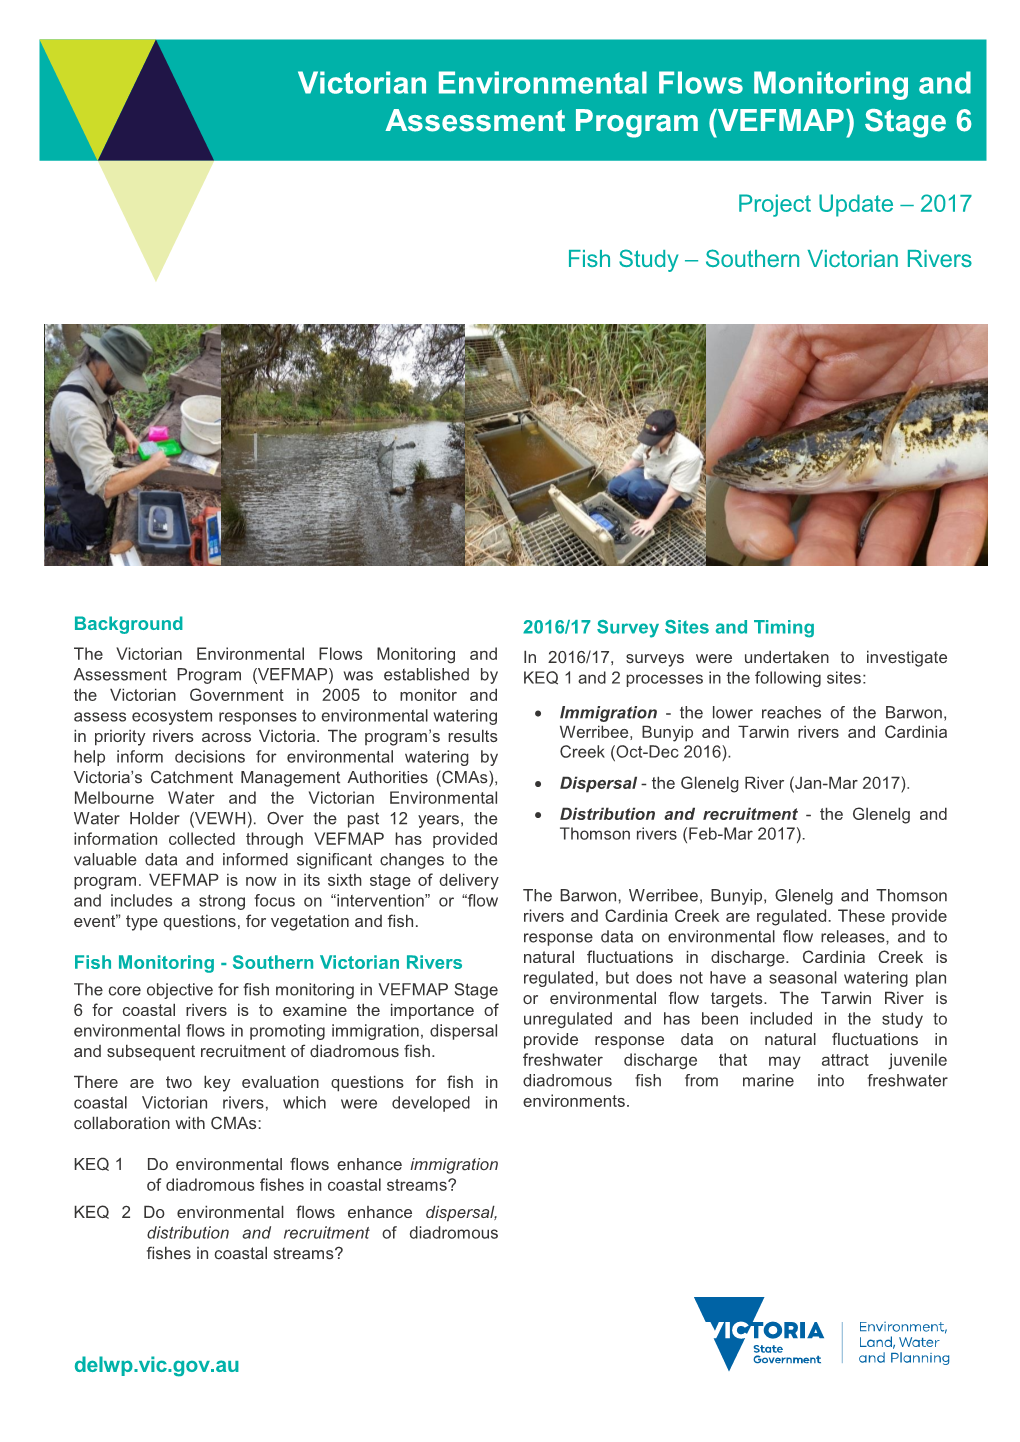 Victorian Environmental Flows Monitoring and Assessment Program (VEFMAP) Stage 6